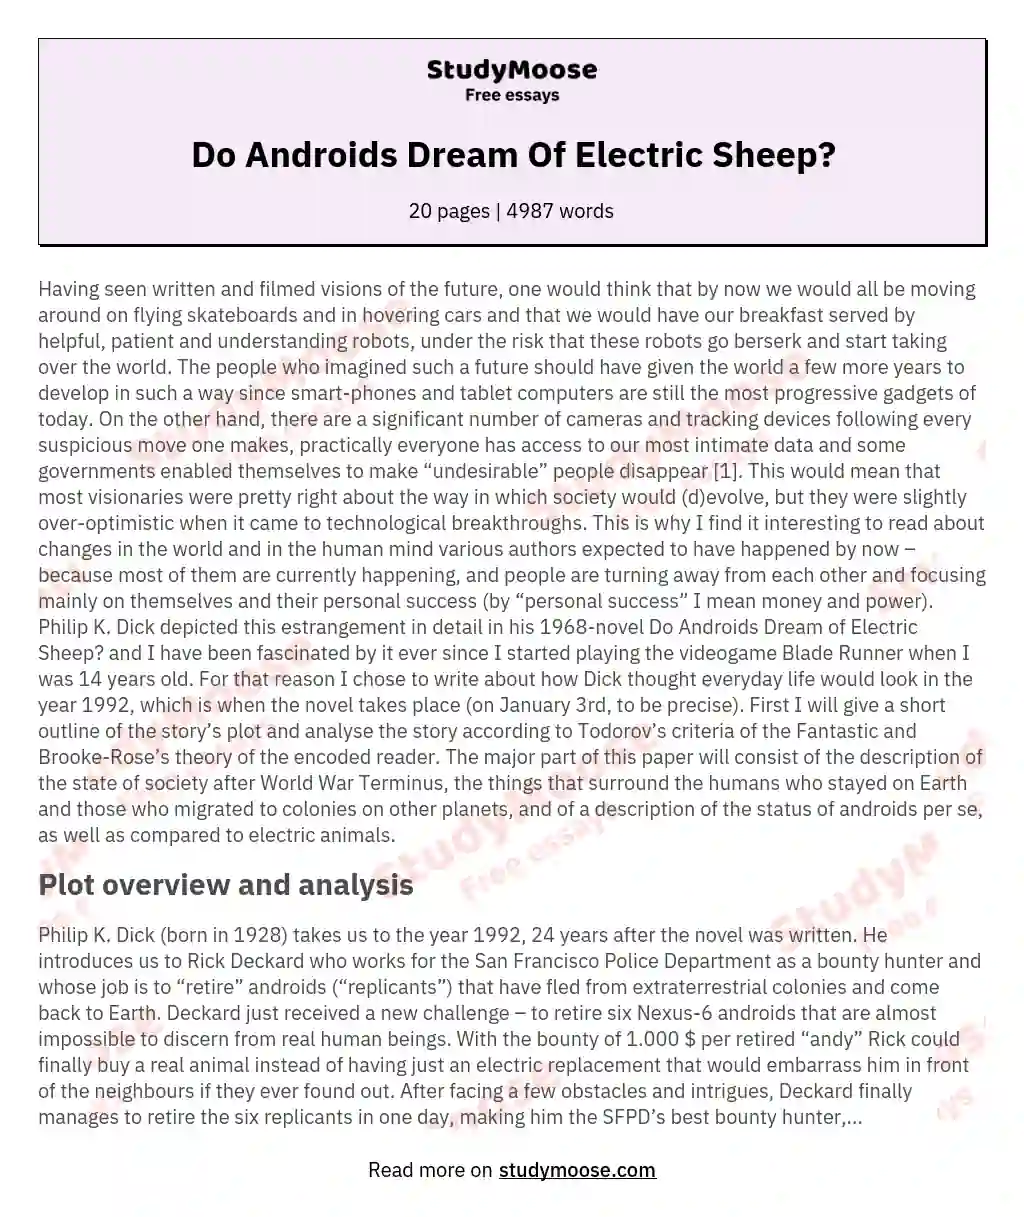 essay about sheep